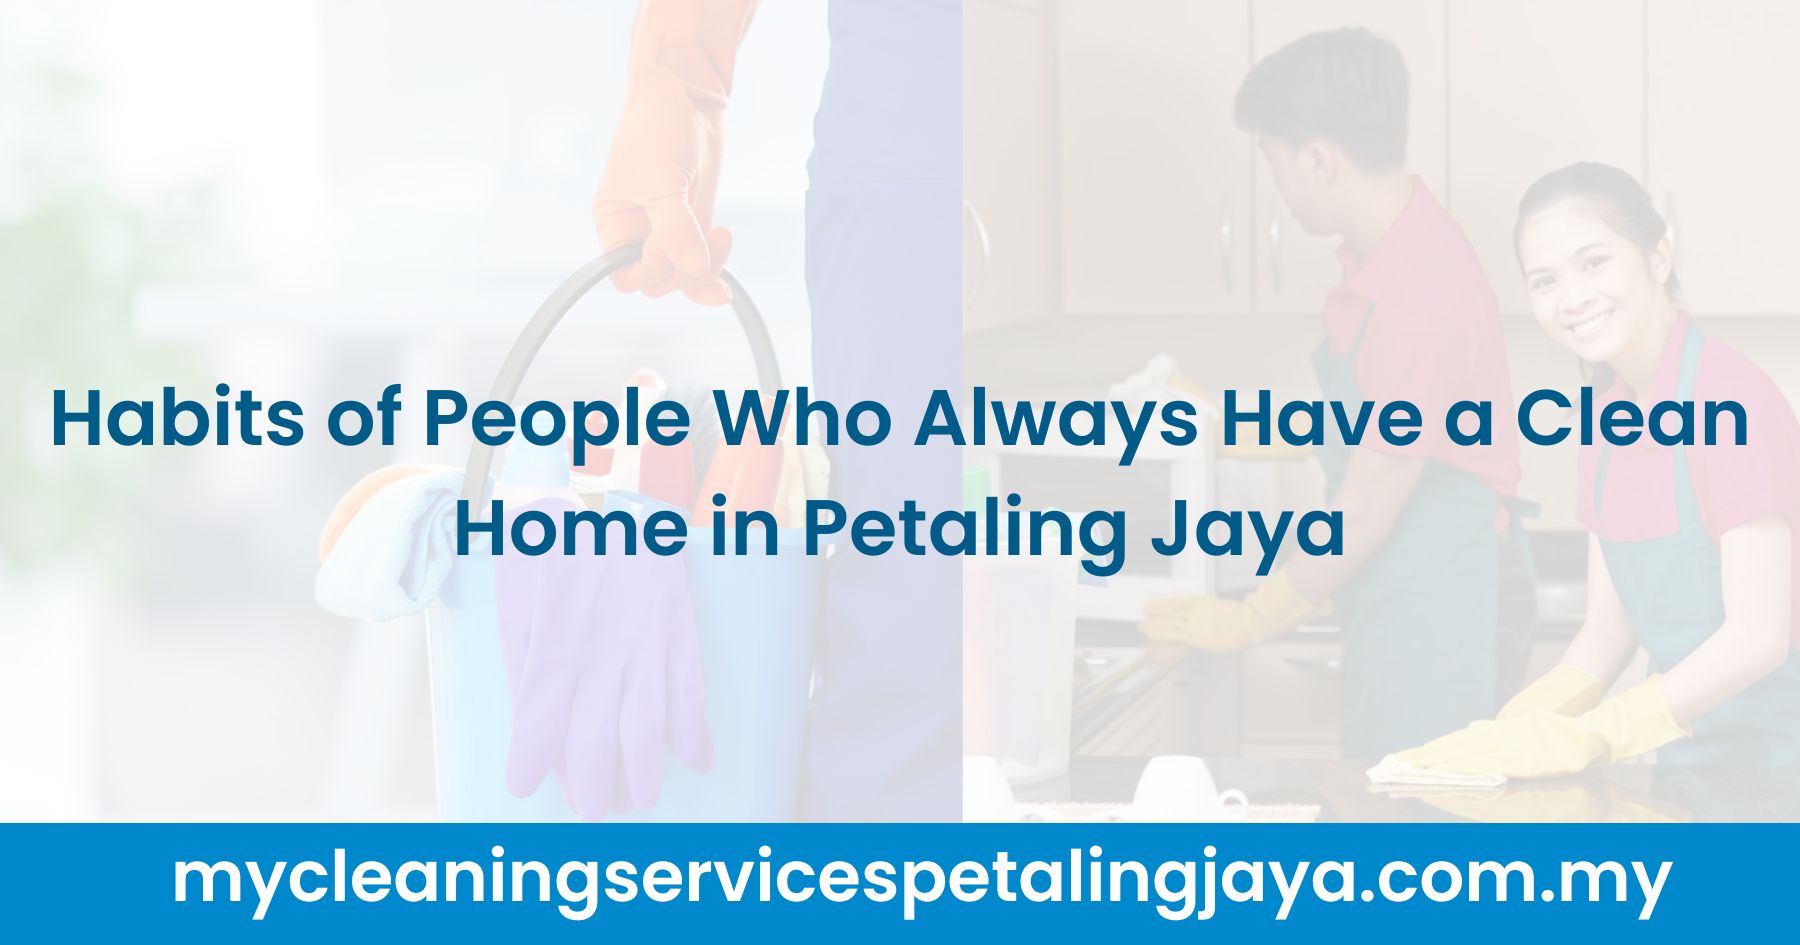 Habits of People Who Always Have a Clean Home in Petaling Jaya